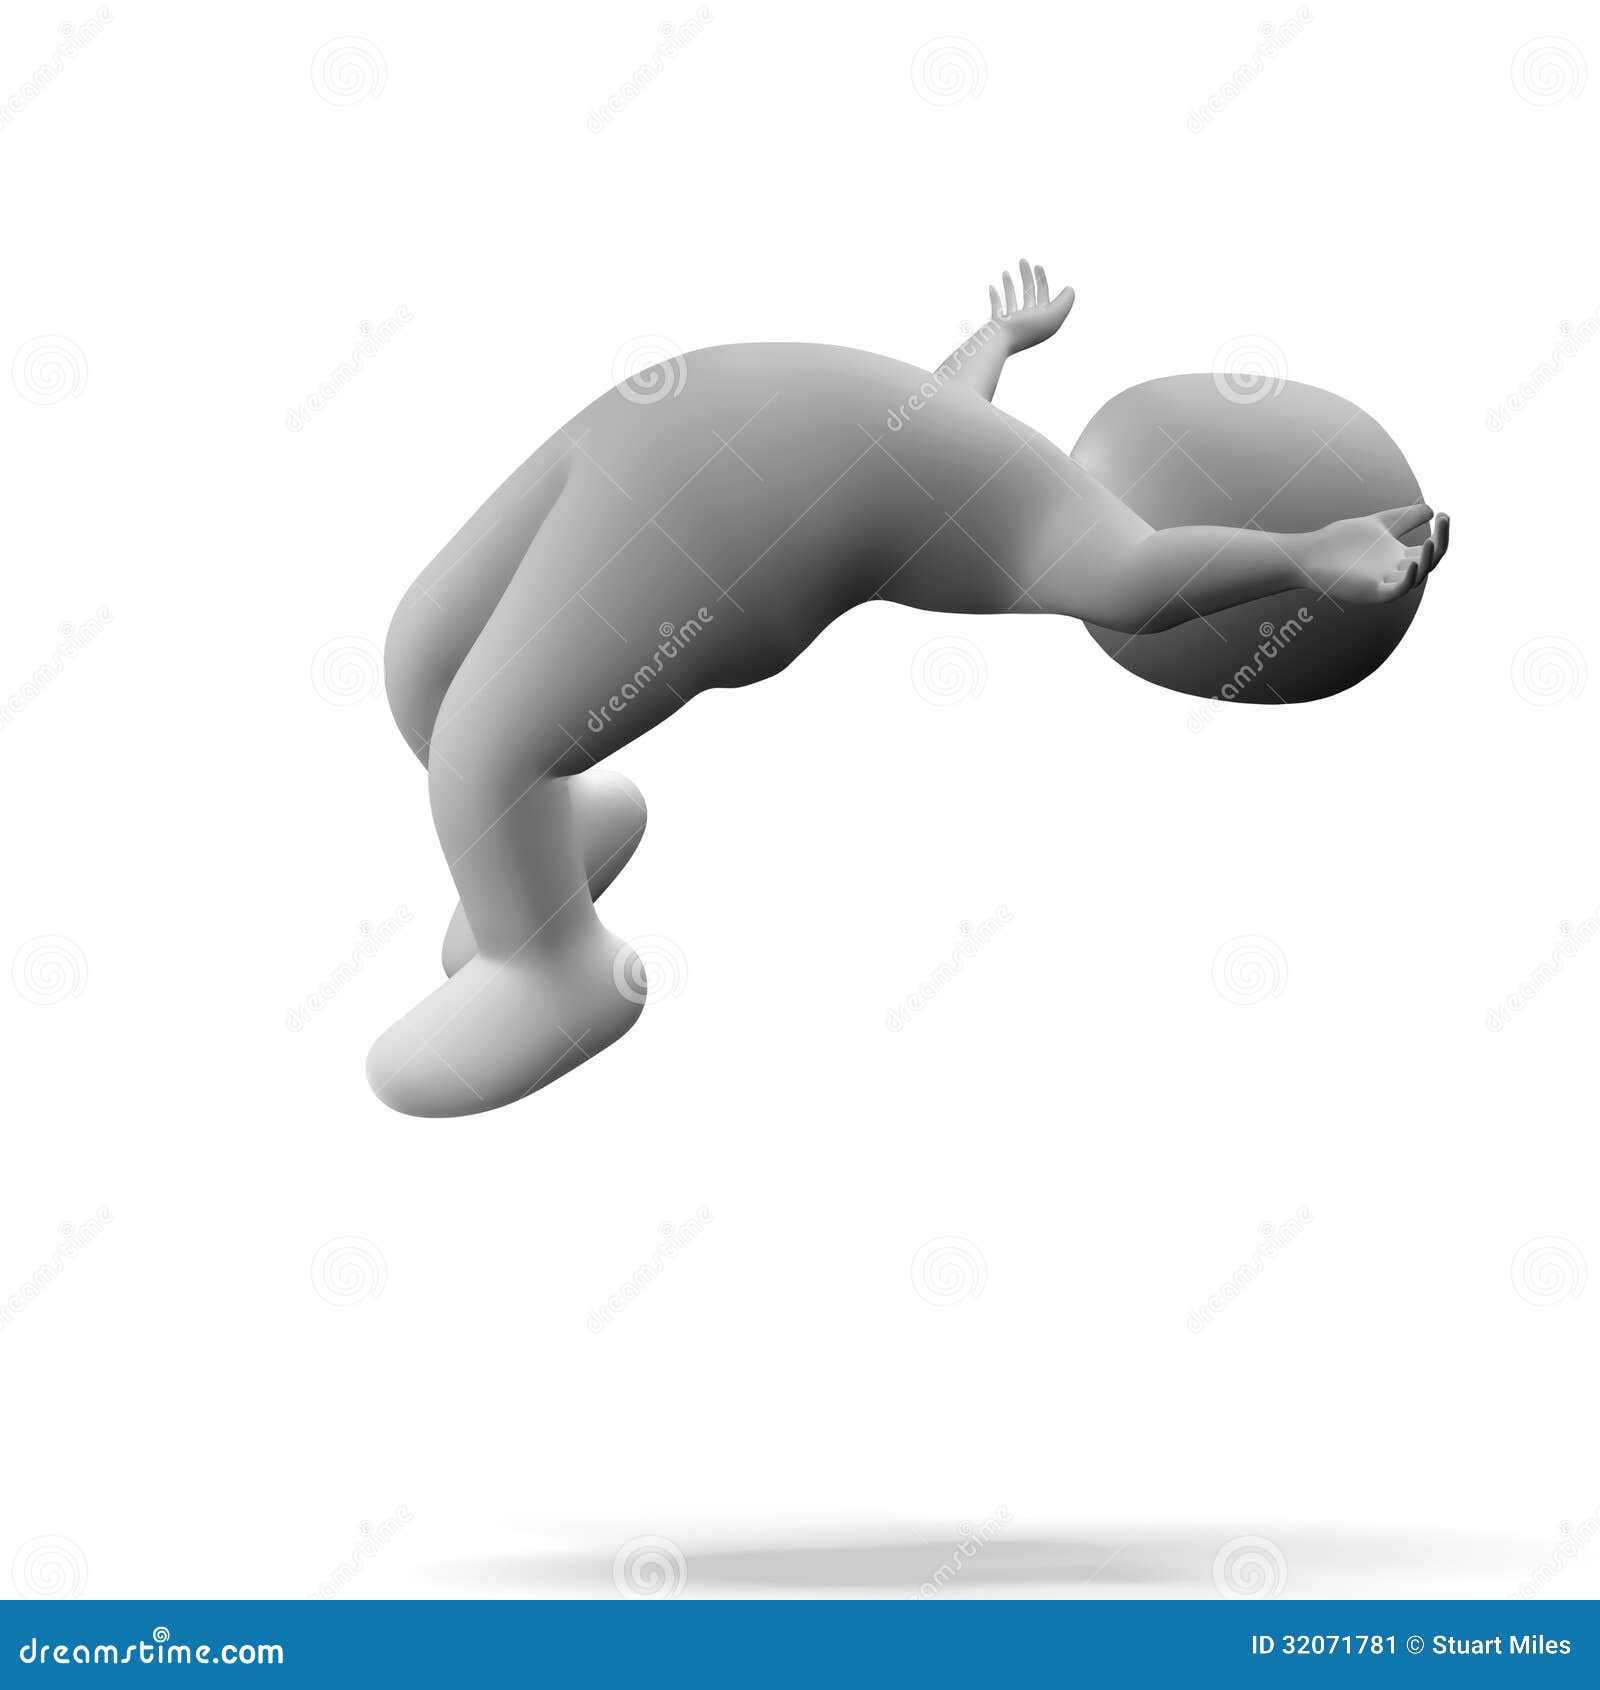 falling 3d character showing peril and danger